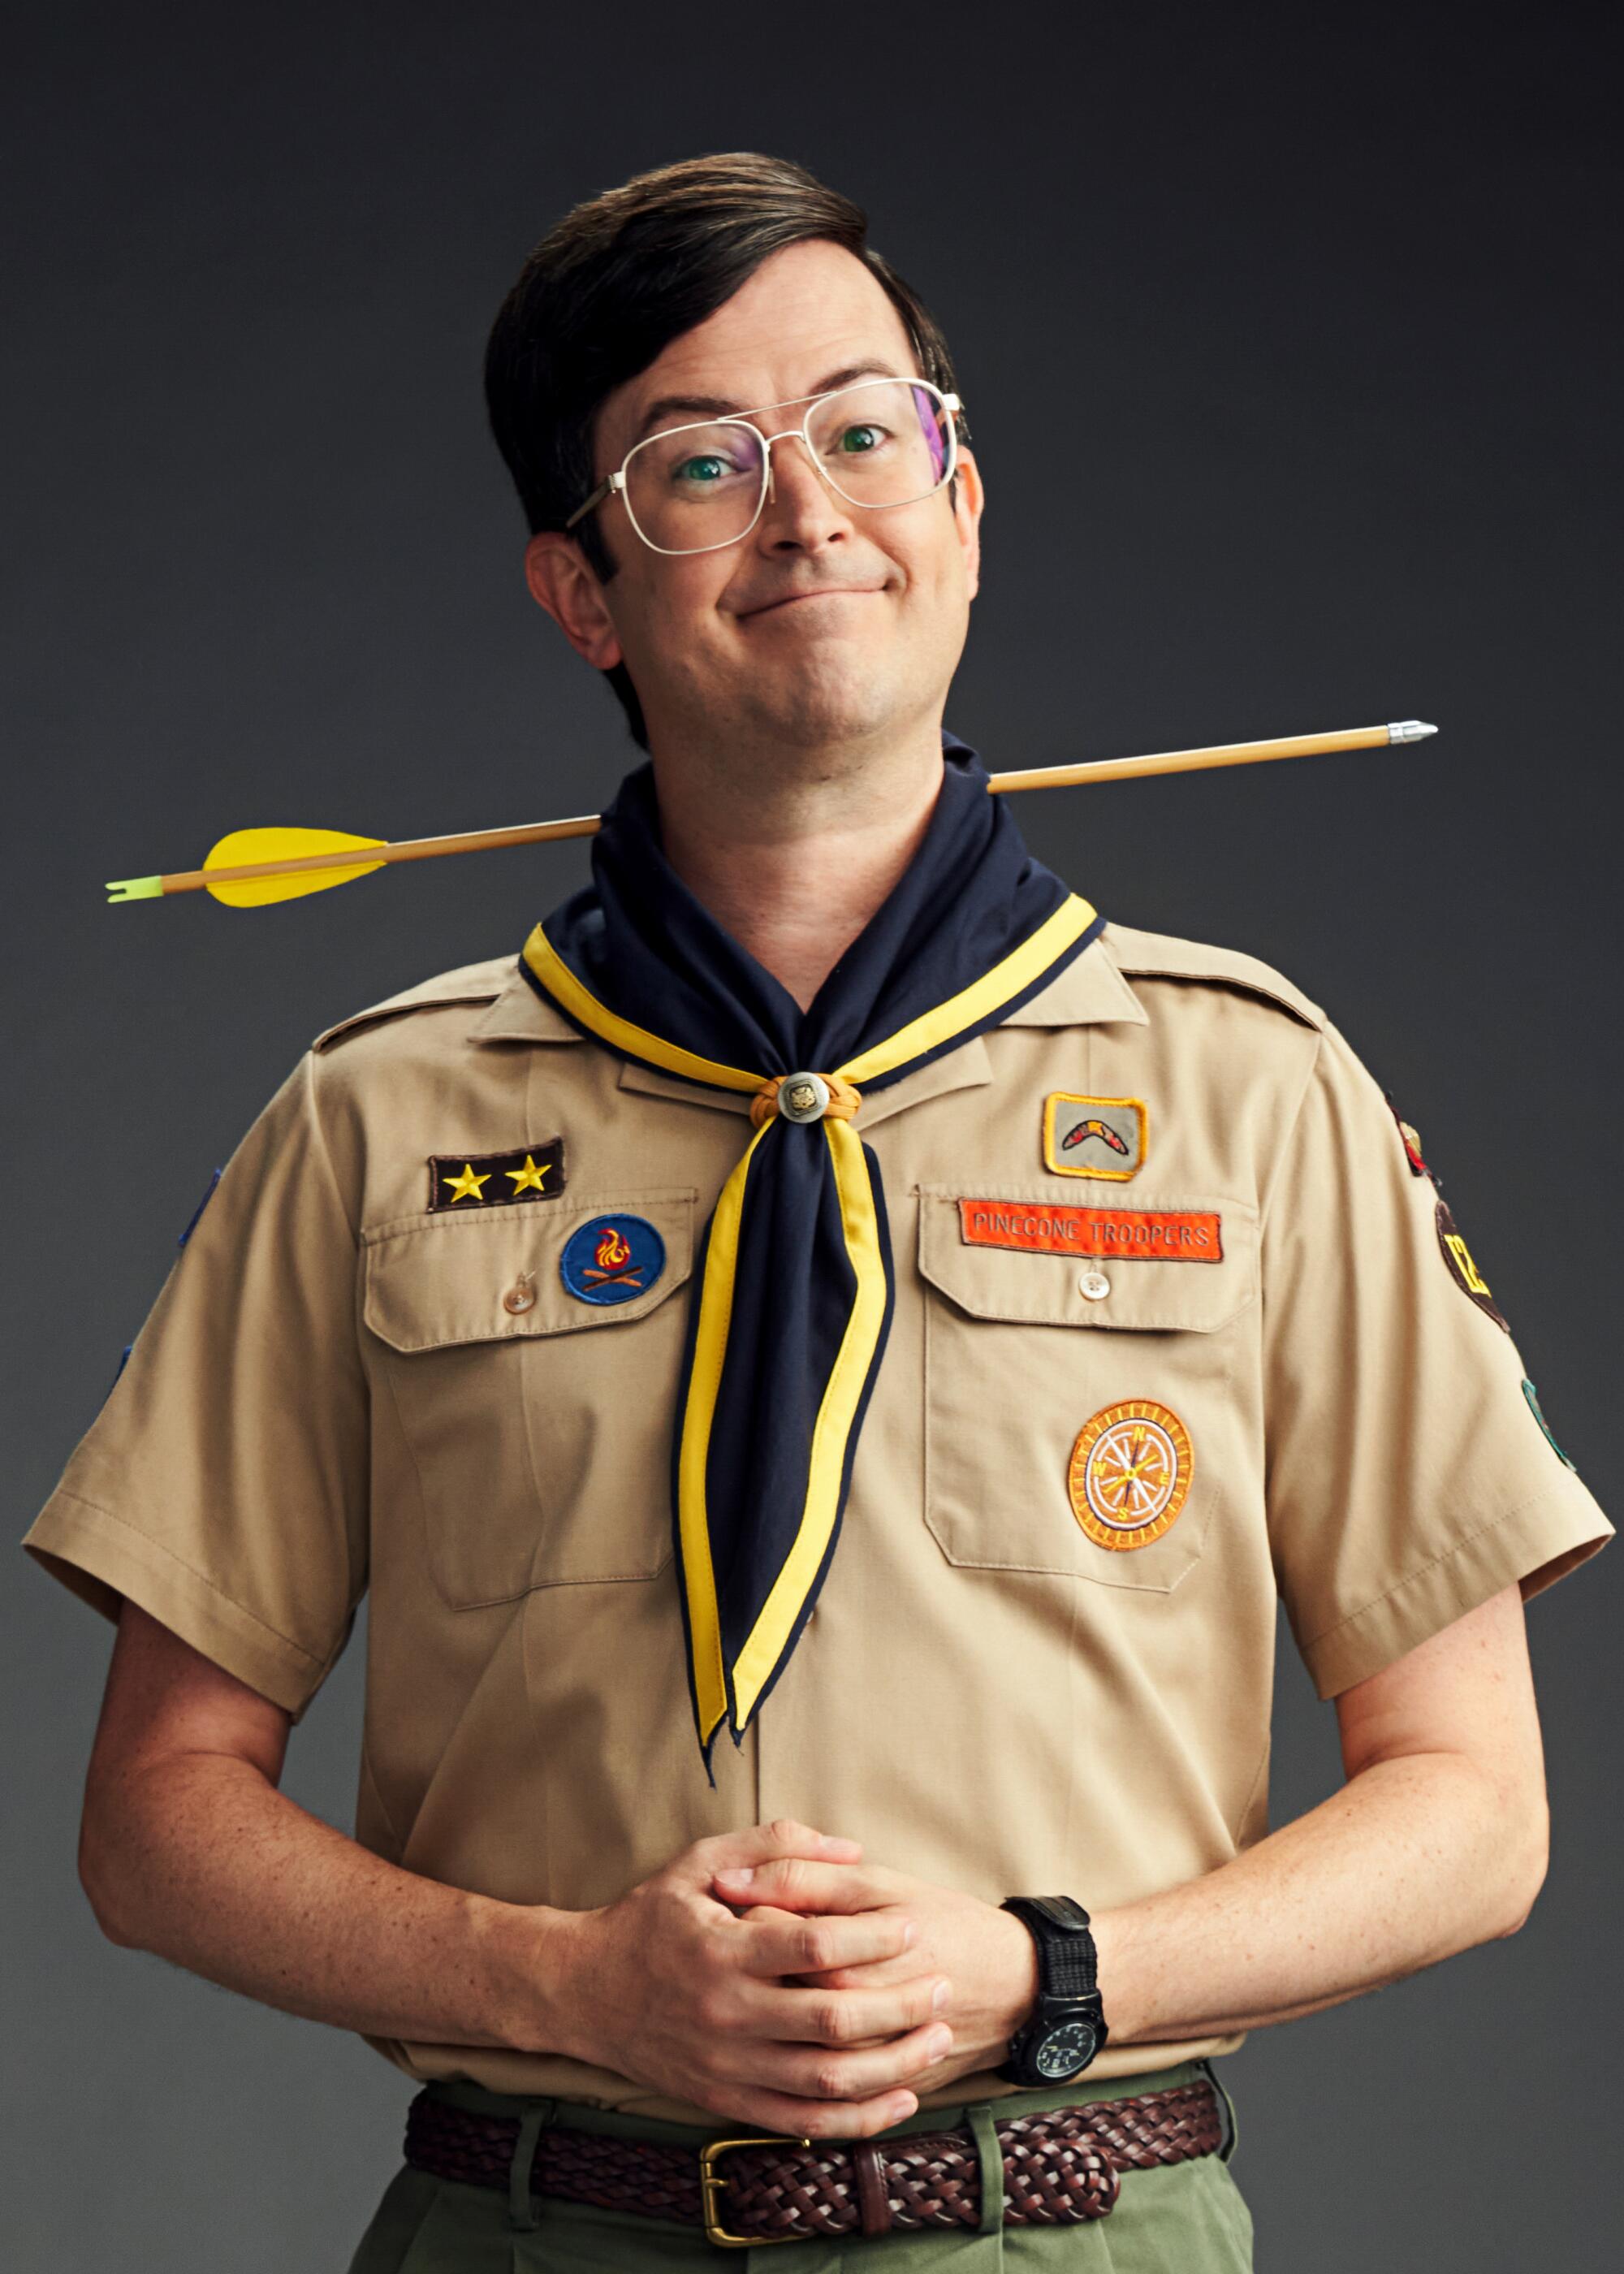 Richie Moriarty as Pete, wears a scout leader uniform and has an arrow going through his neck.